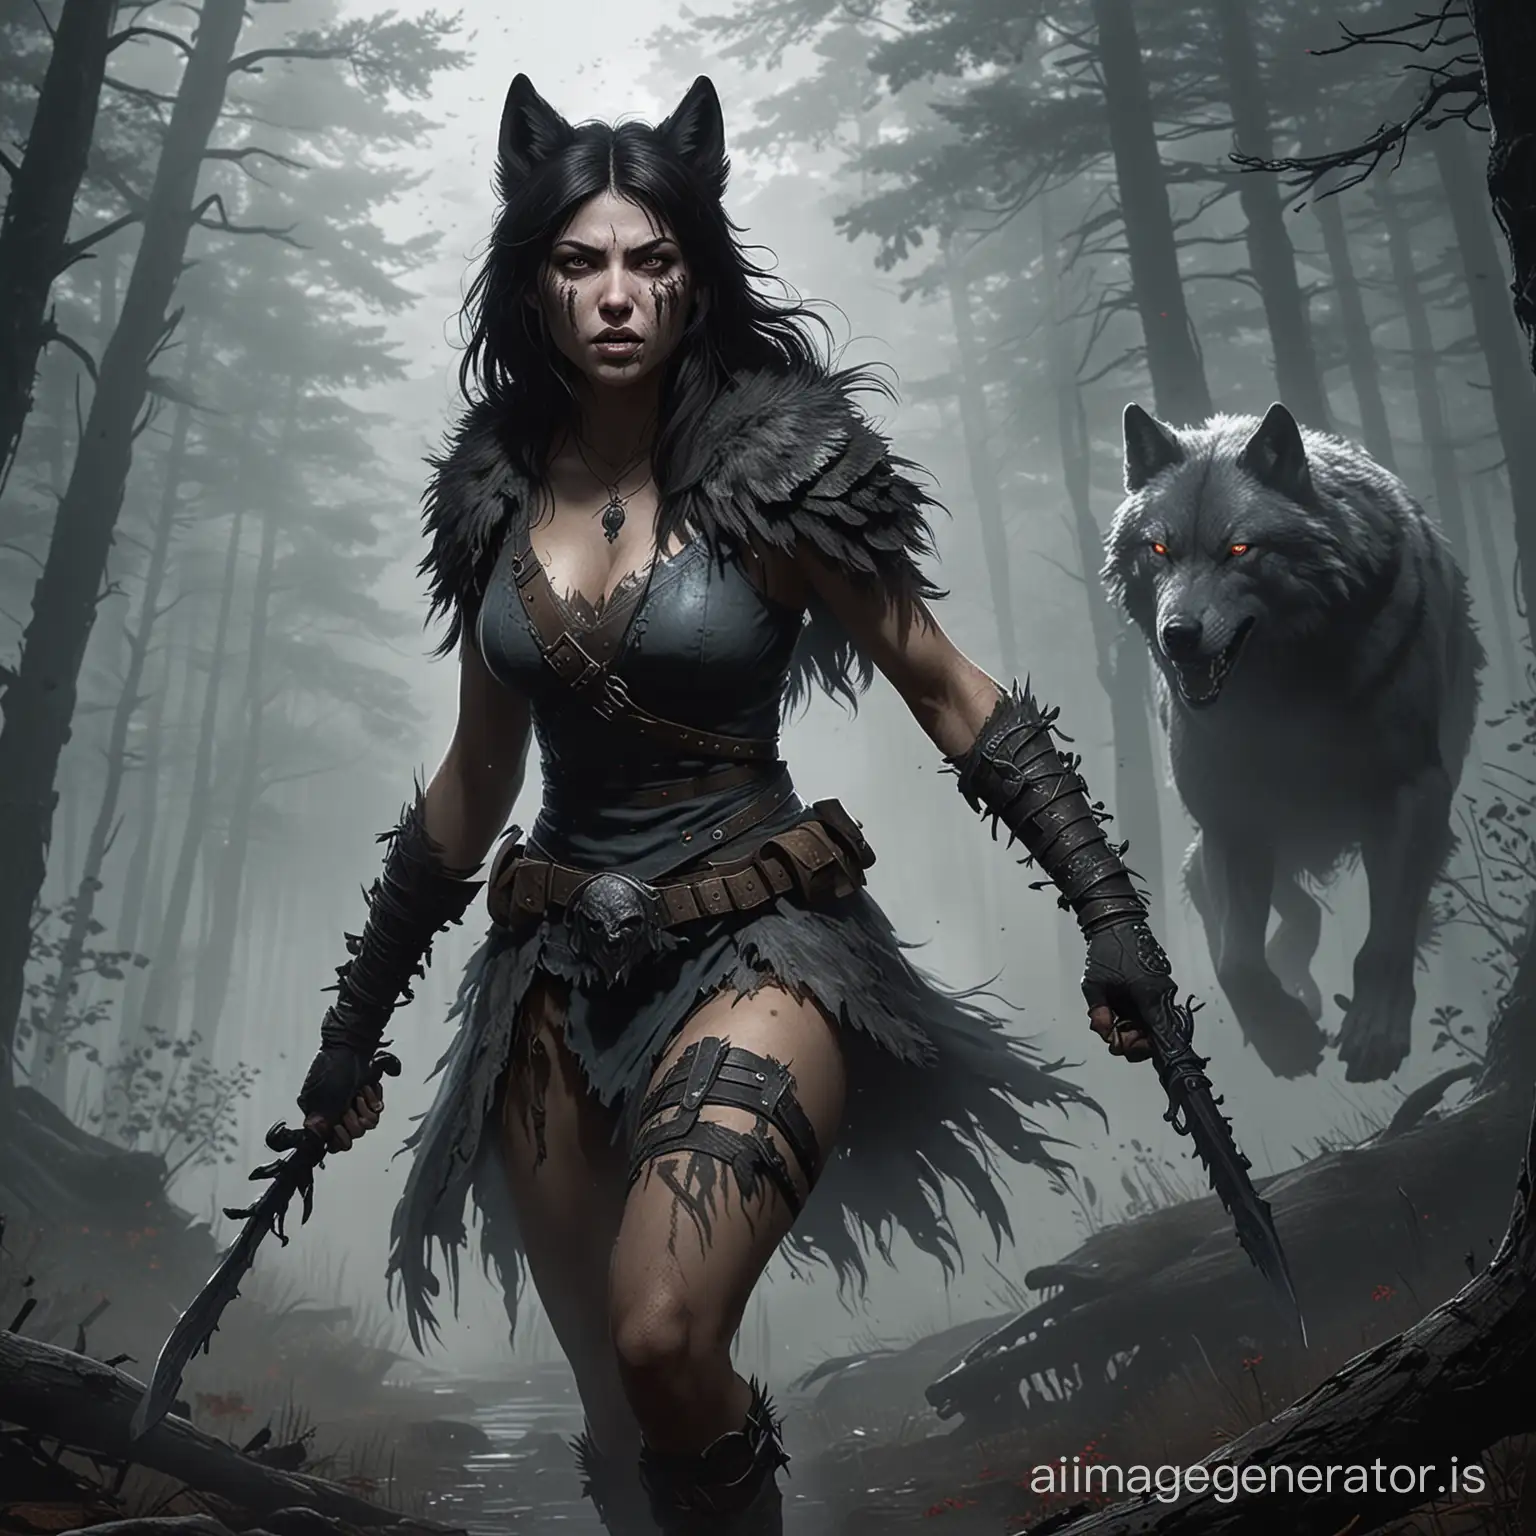 Wolf Maiden with dark hair armed for the fight side by side with Alpha Wolf  striding into forest into the fog to fight the dead by daylight entity lurking there.